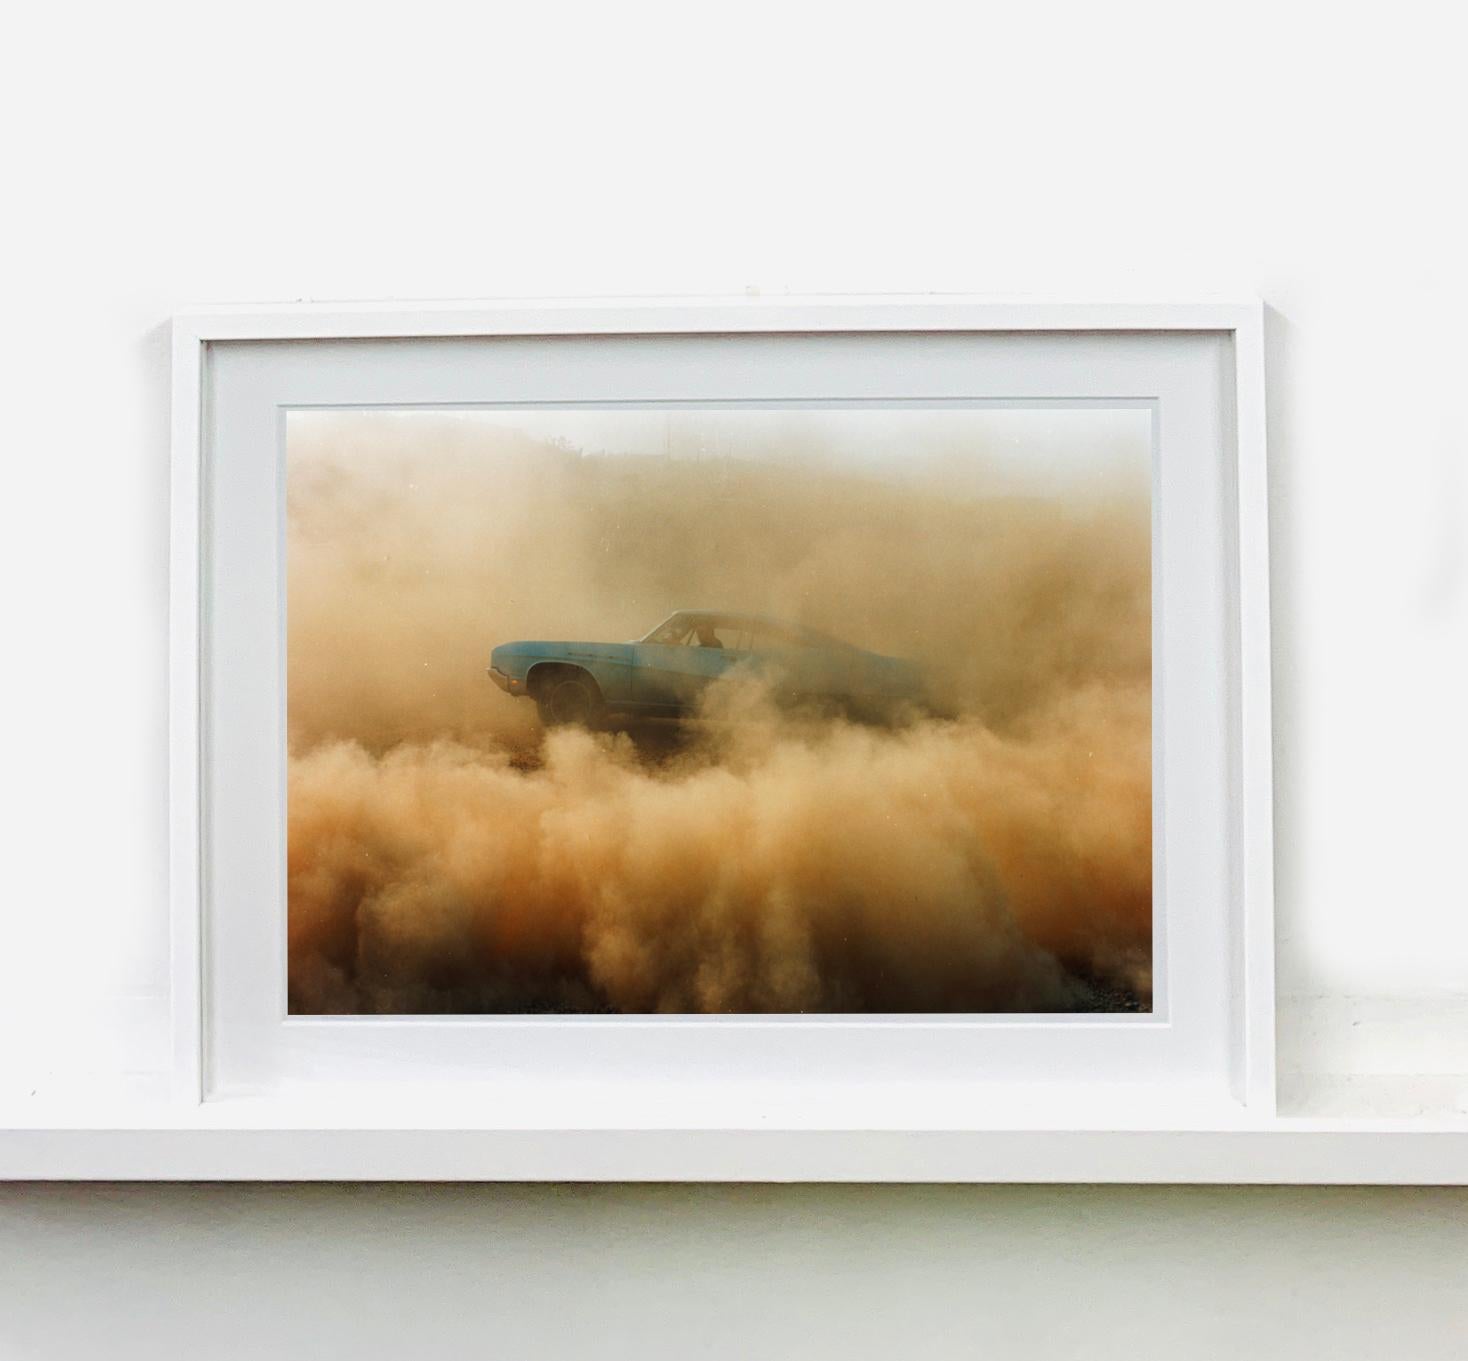 Buick in the Dust, Hemsby, Norfolk - Color Photography Triptych 5